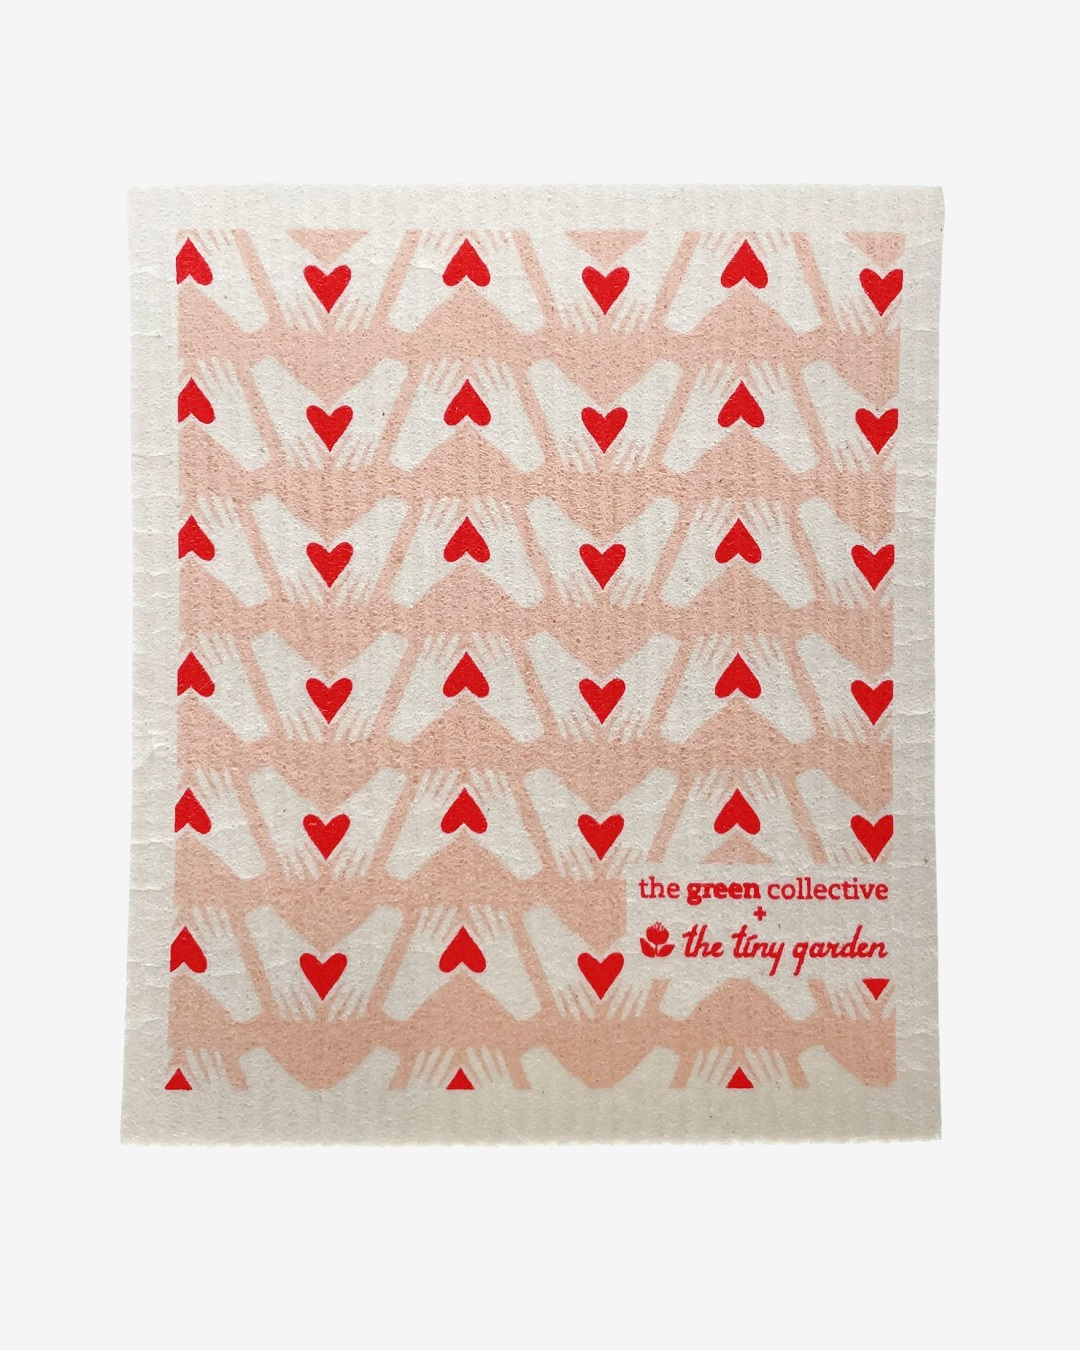 Dish cloth with hearts and hands on it